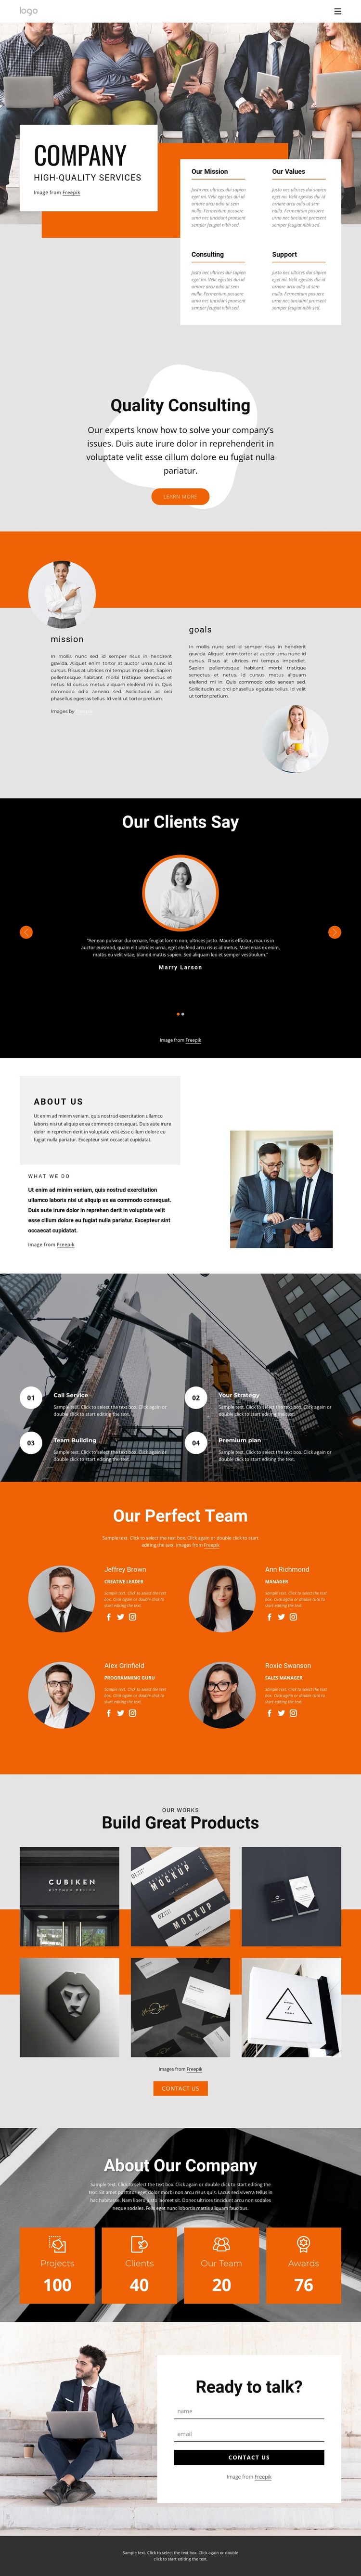 Hight quality consulting firm Web Design